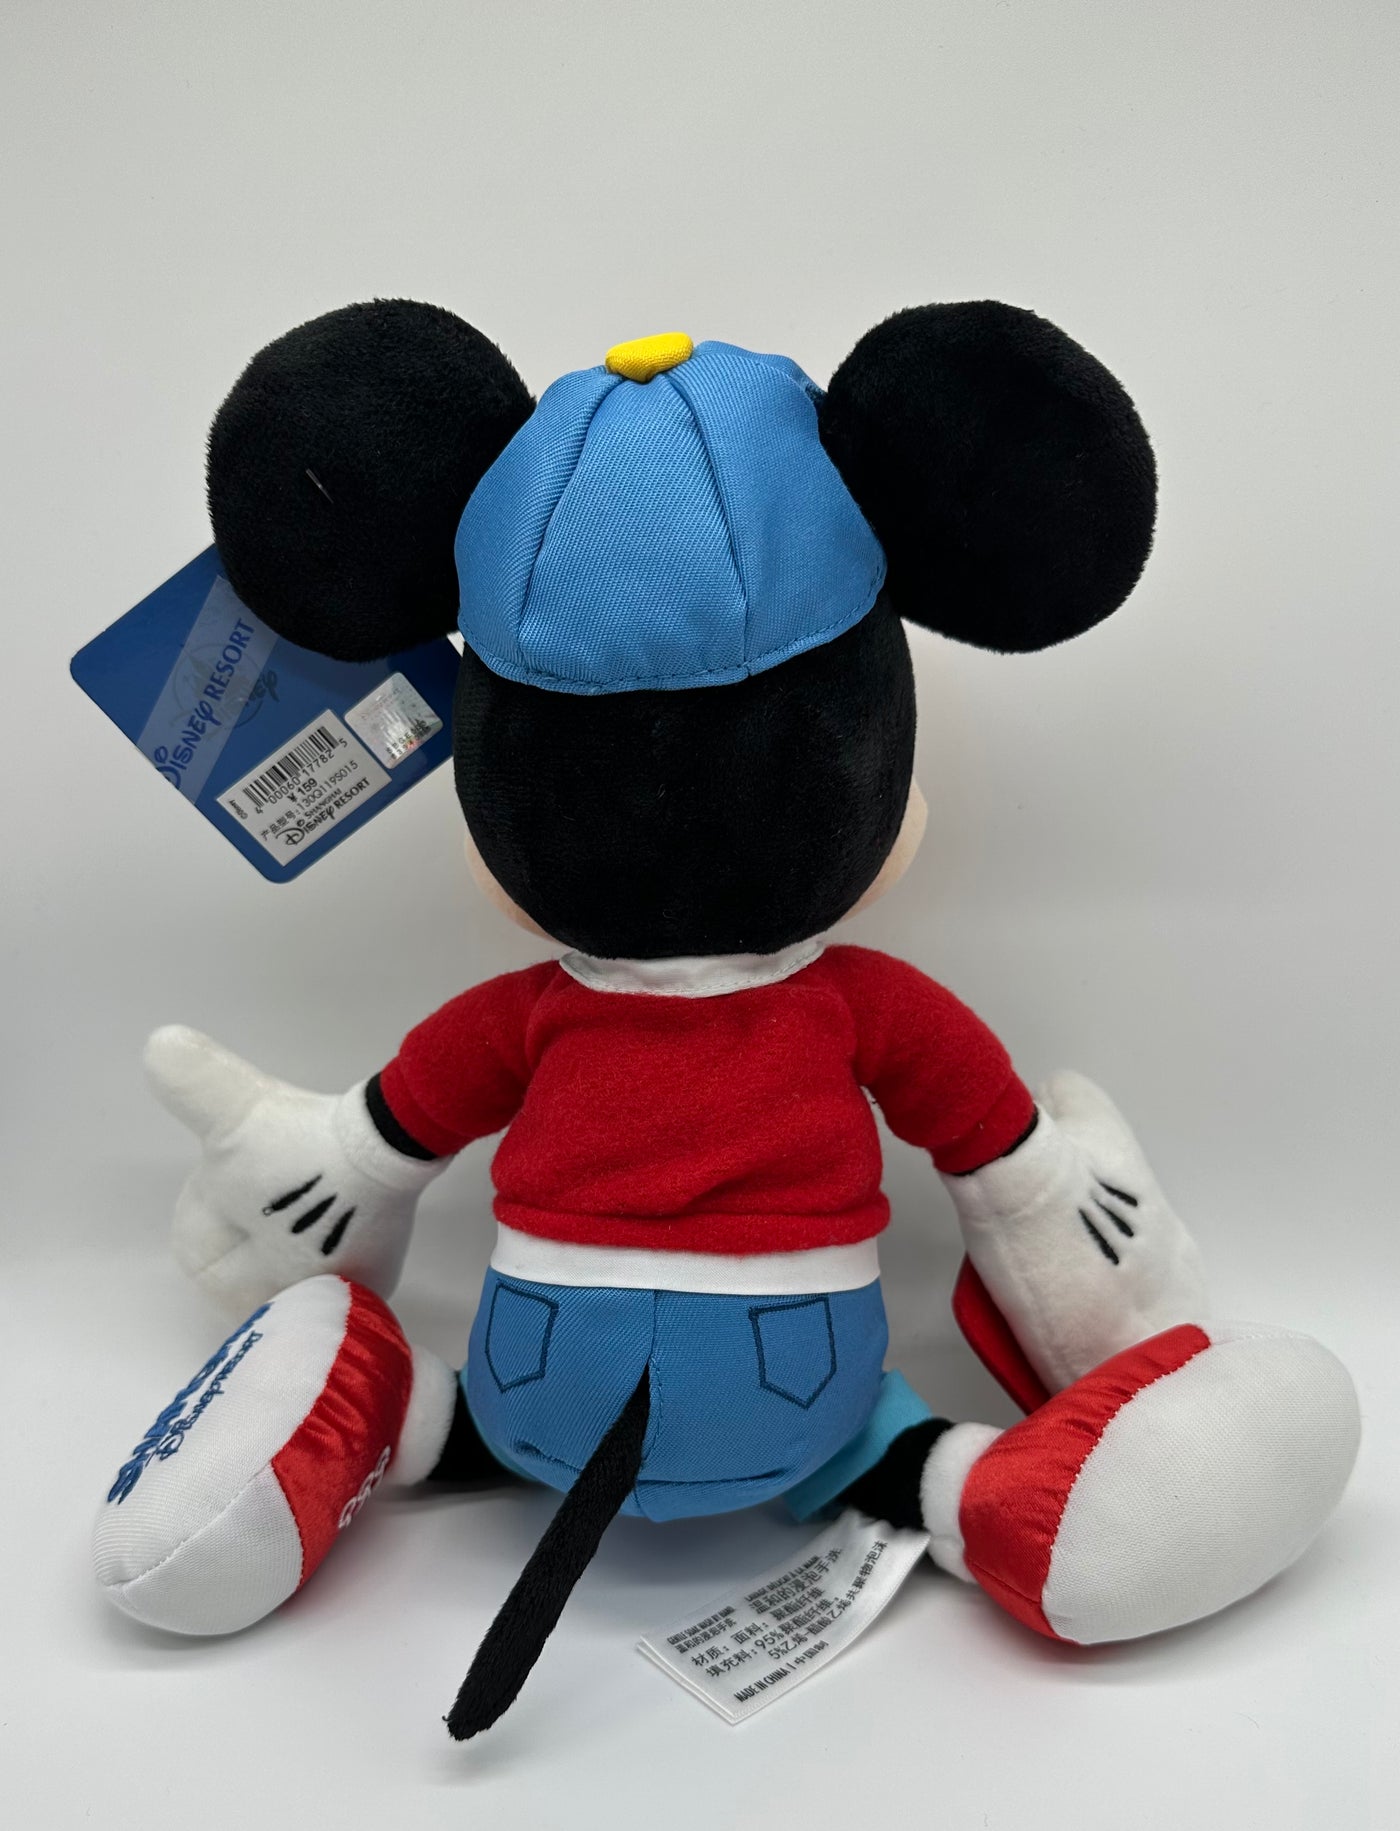 Disney Parks Shanghai Resort Authentic Mickey Plush New with Tags